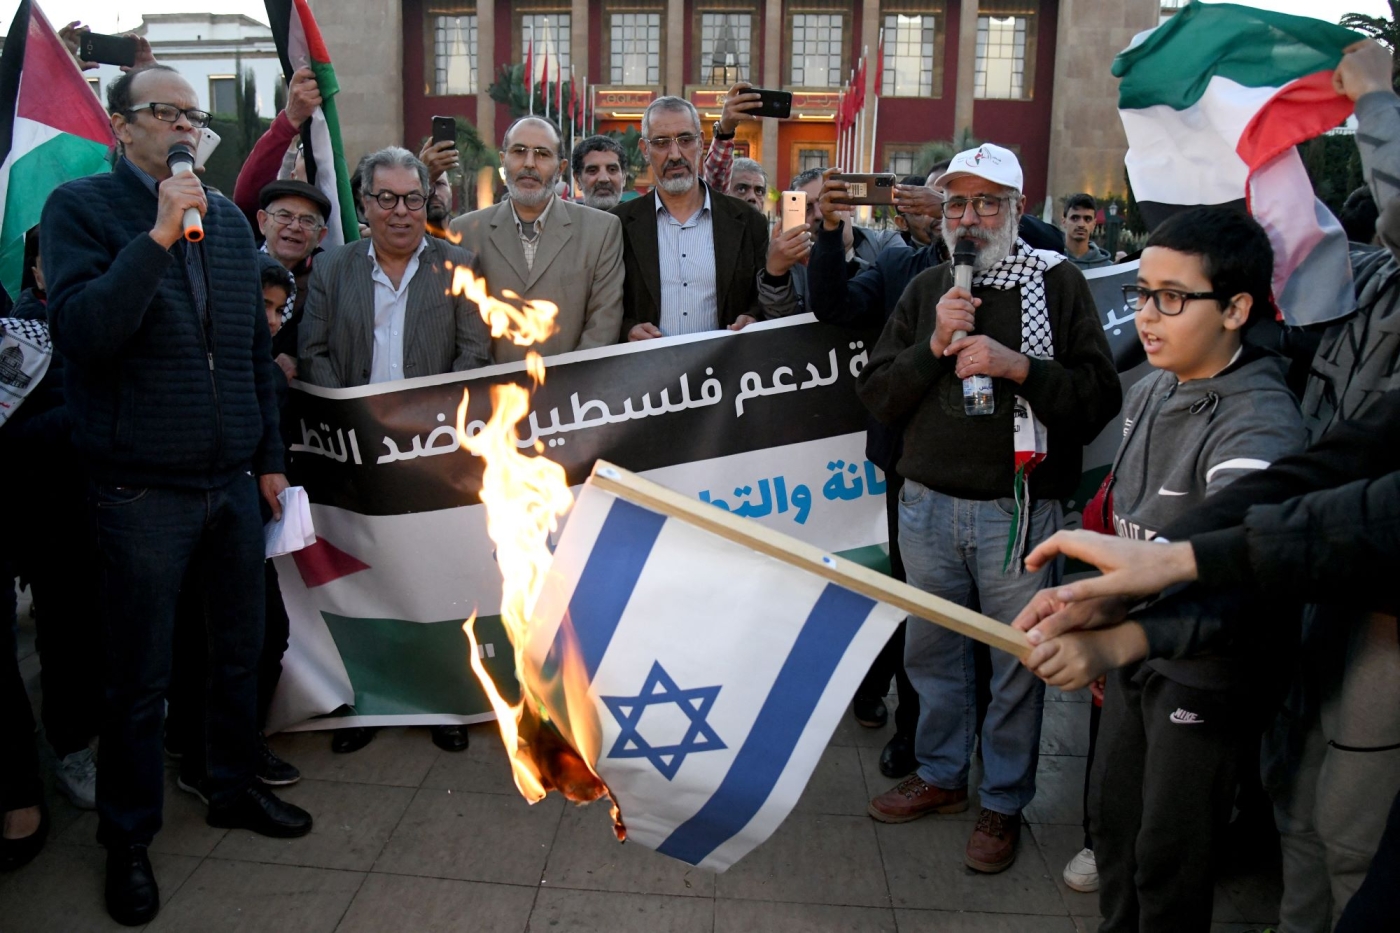 Moroccans burn the Israeli flag as they gather to protest the normalisation of ties with Israel, outside the parliament building in the capital Rabat on December 24, 2022 (AFP)